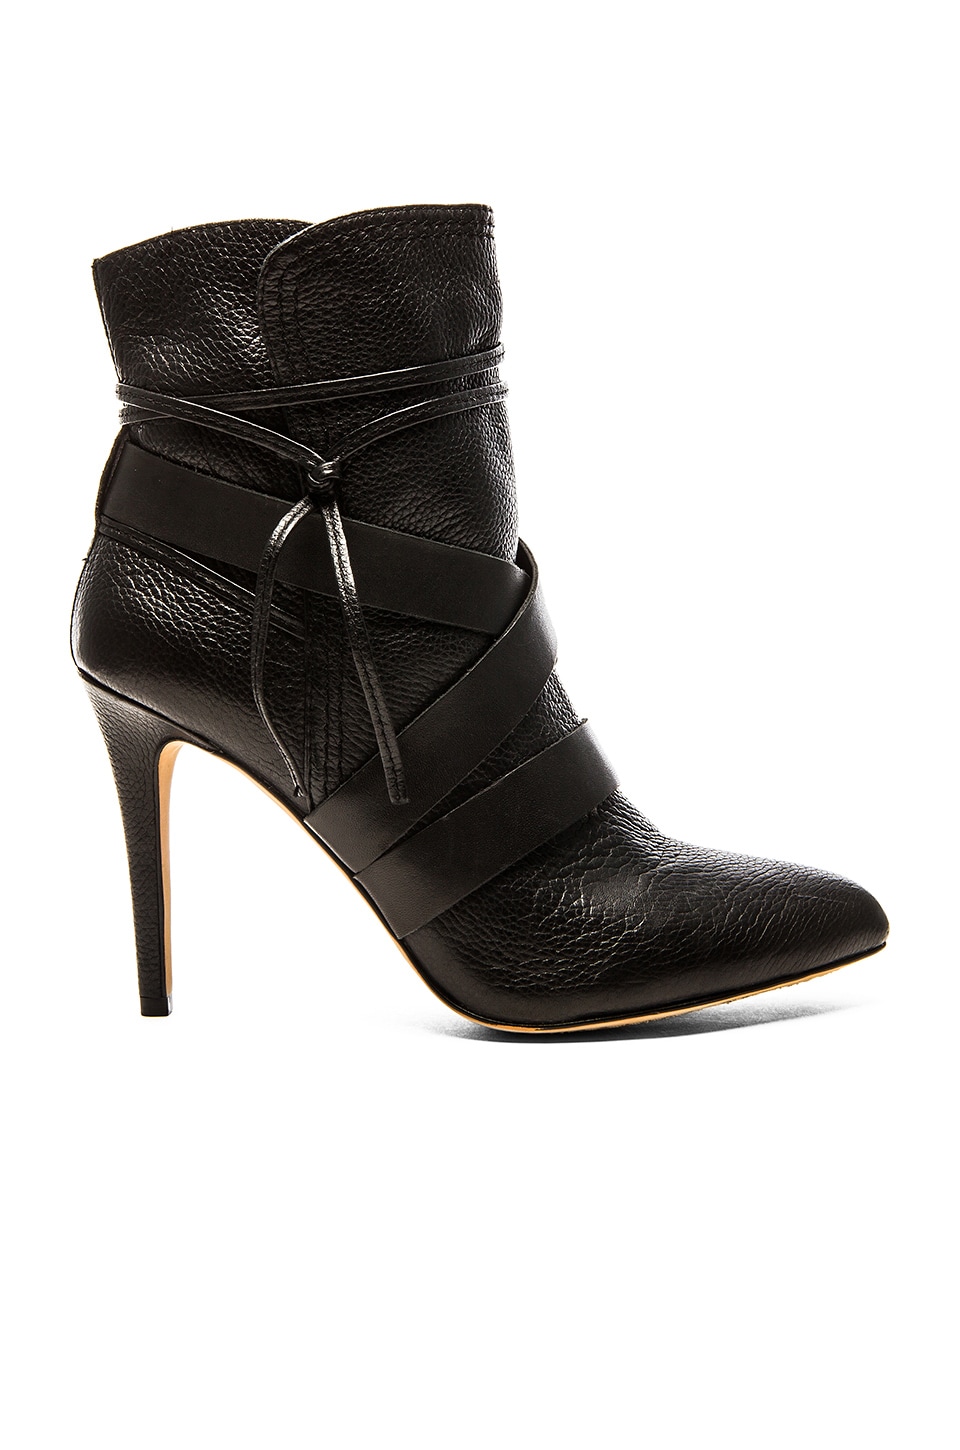 Vince Camuto Solter Bootie in Black